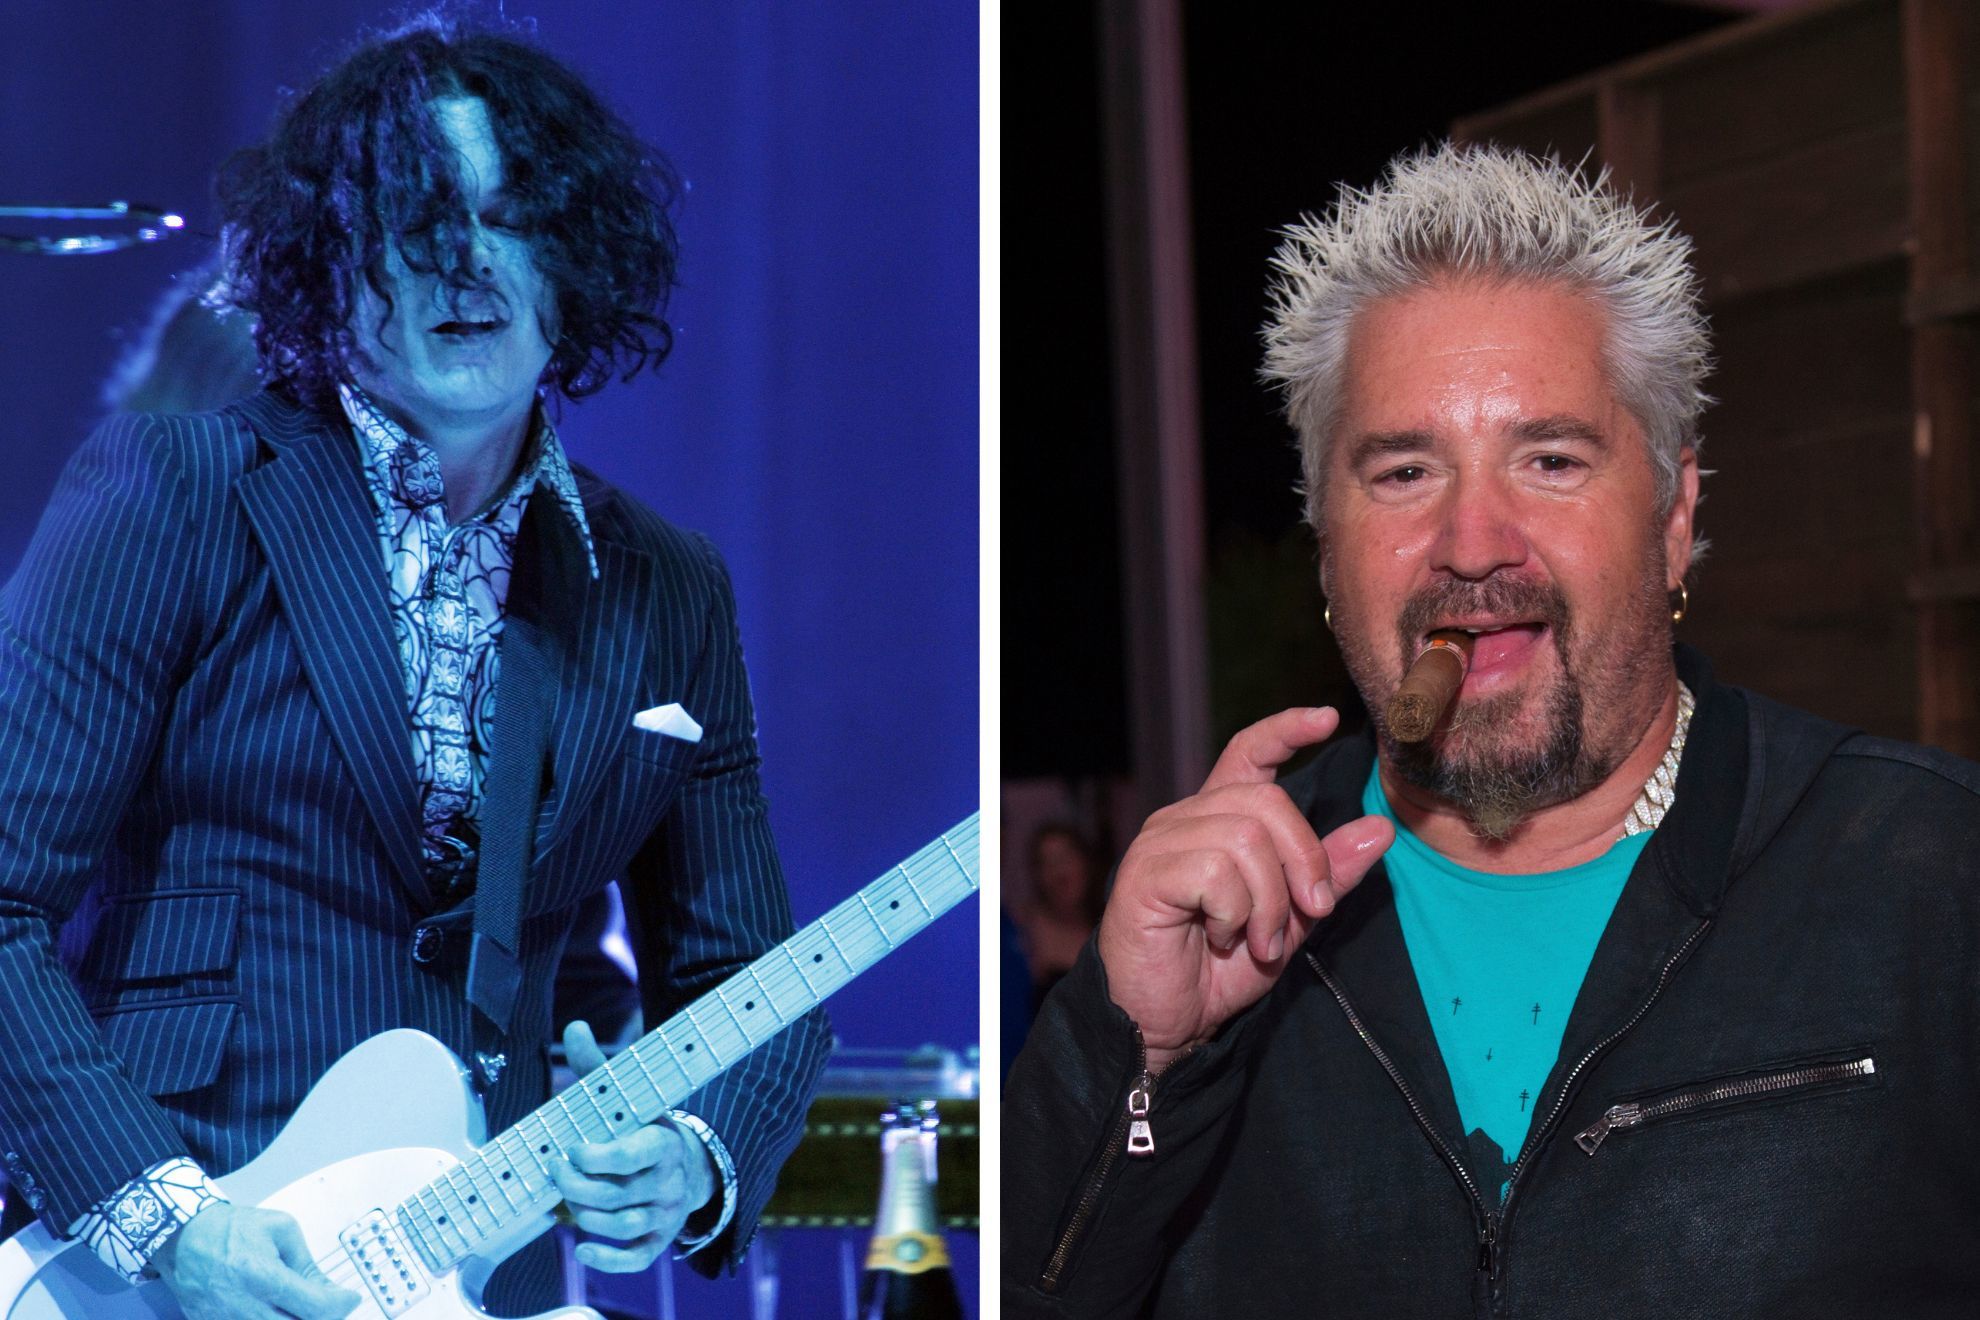 Jack White fumes at Guy Fieri, Mel Gibson and others 'normalizing' Donald Trump